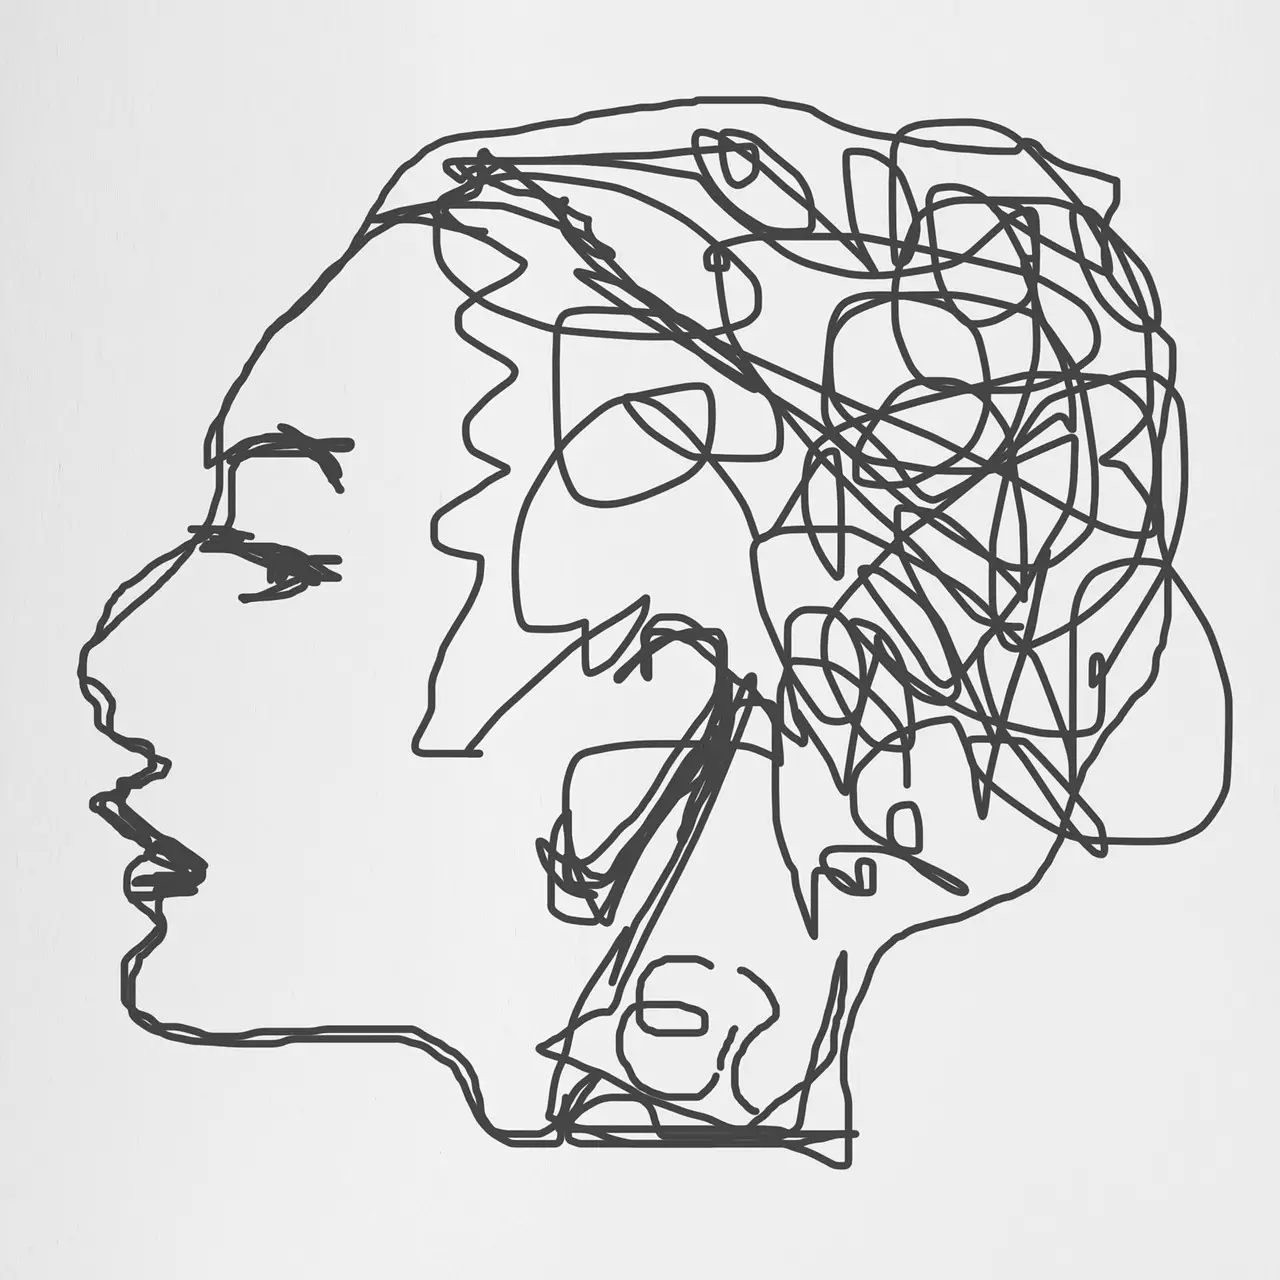 Abstract line drawing of confused or anxious woman's head